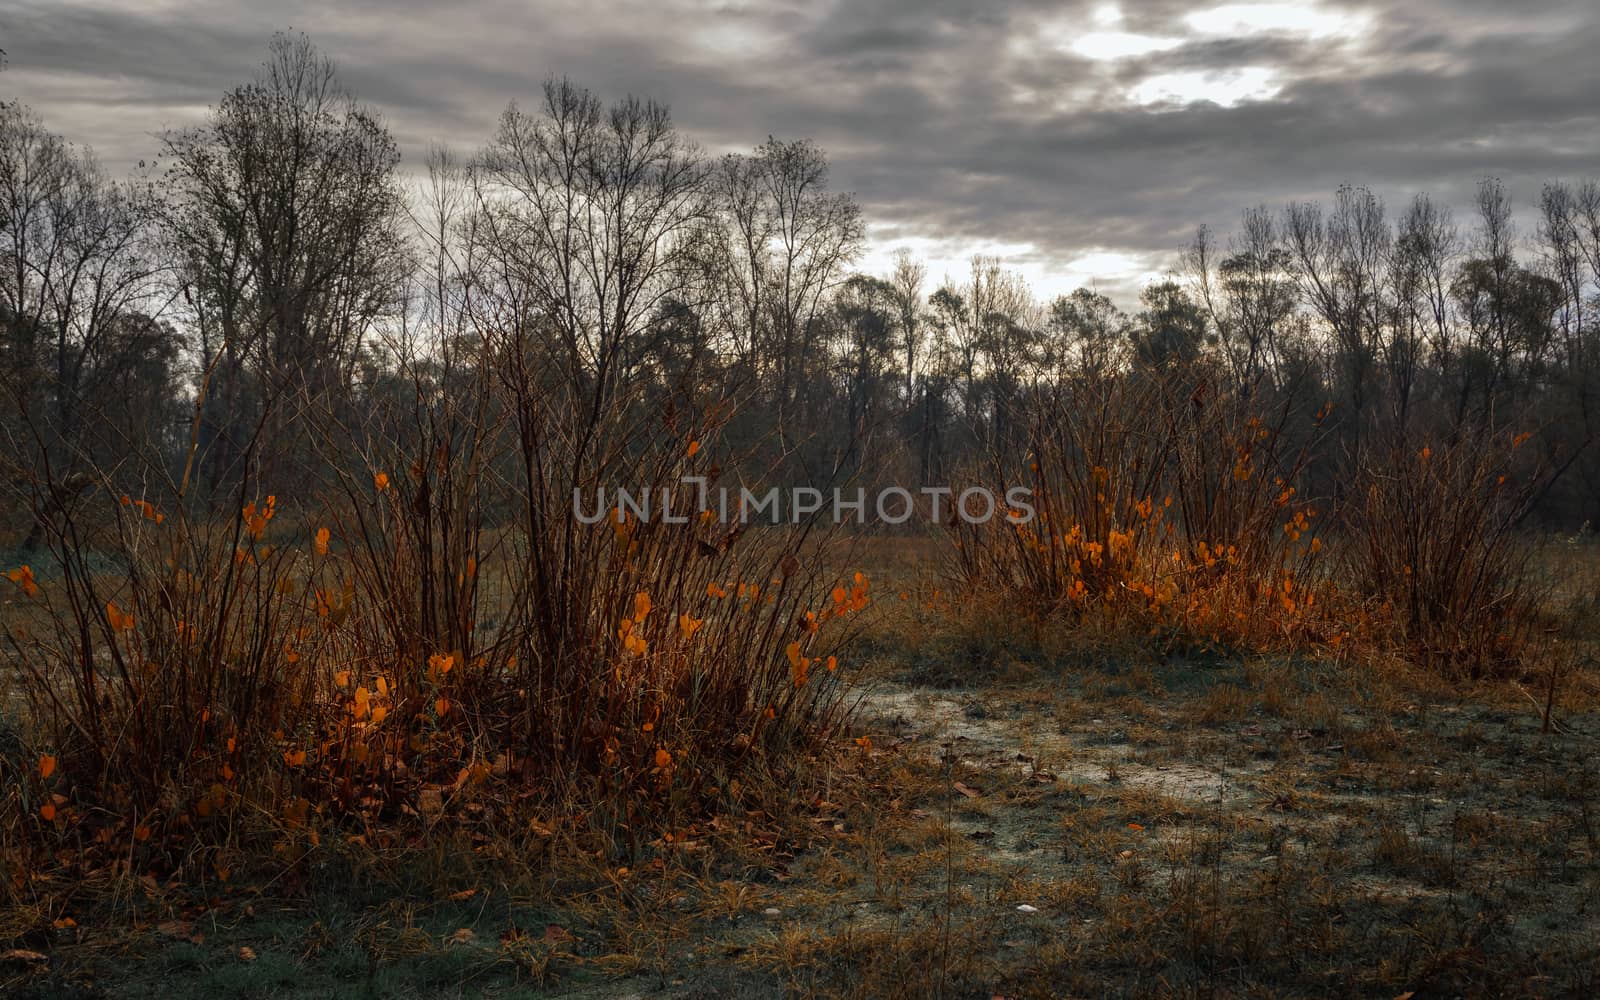 Pictured plants with few leaves orange due to the arrival of winter, desolate atmosphere,Ticino riverside Italy.